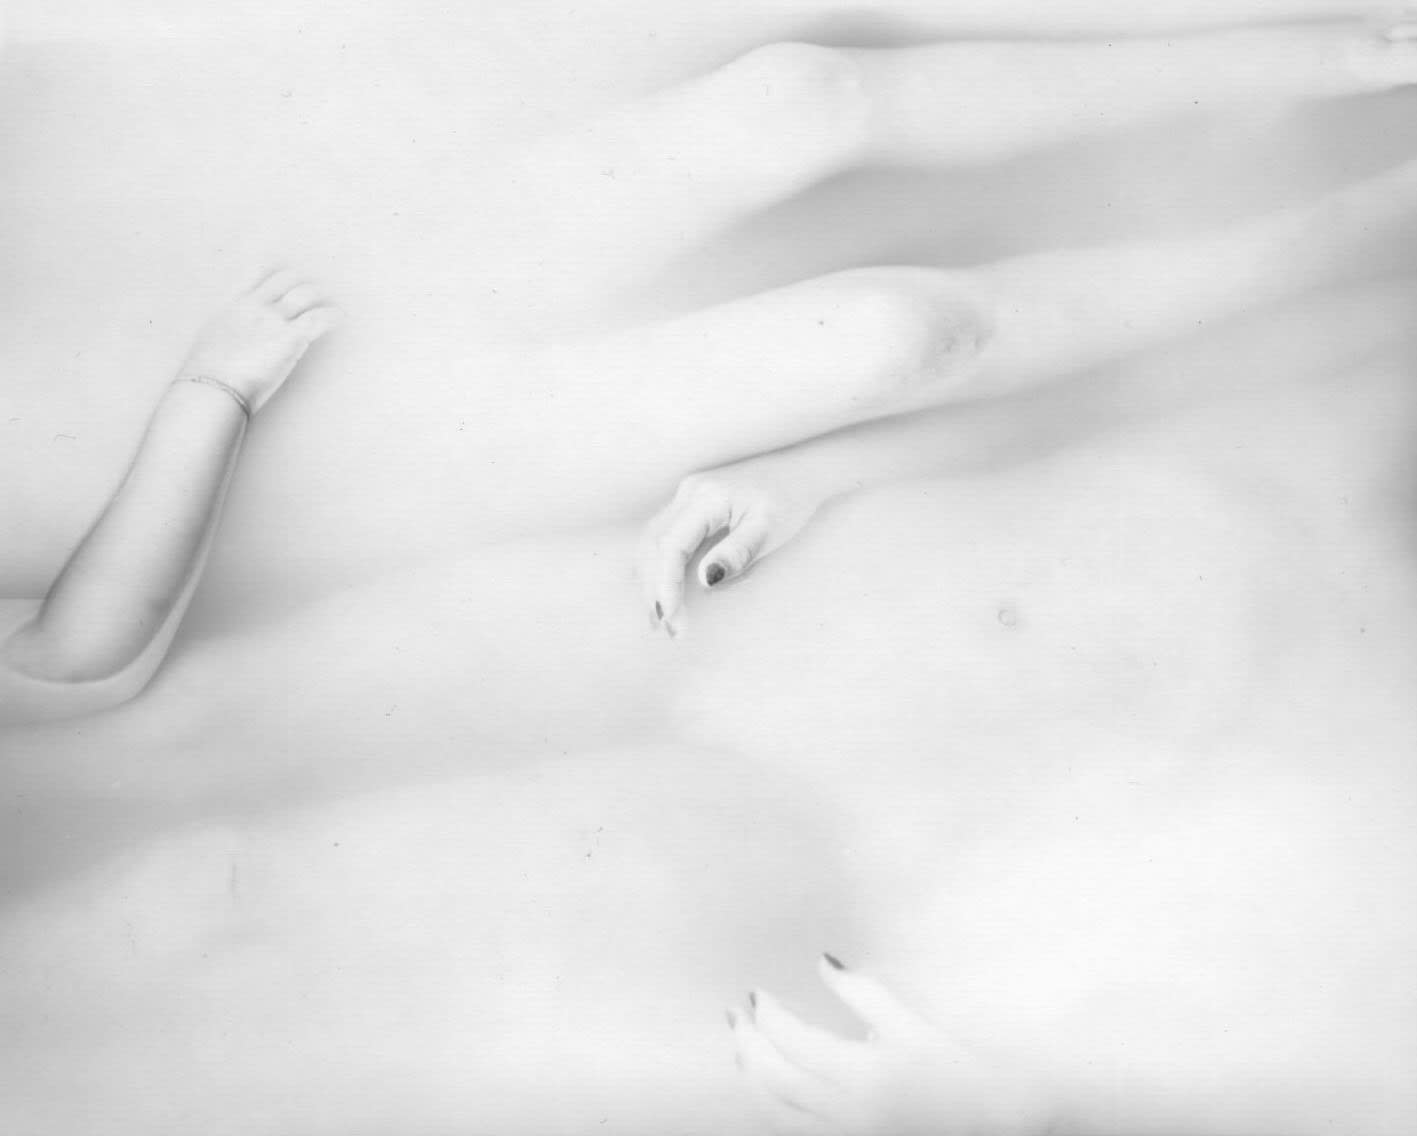 Jessie and Virginia in the bath tub, from the Immediate Family series, by Sally Mann